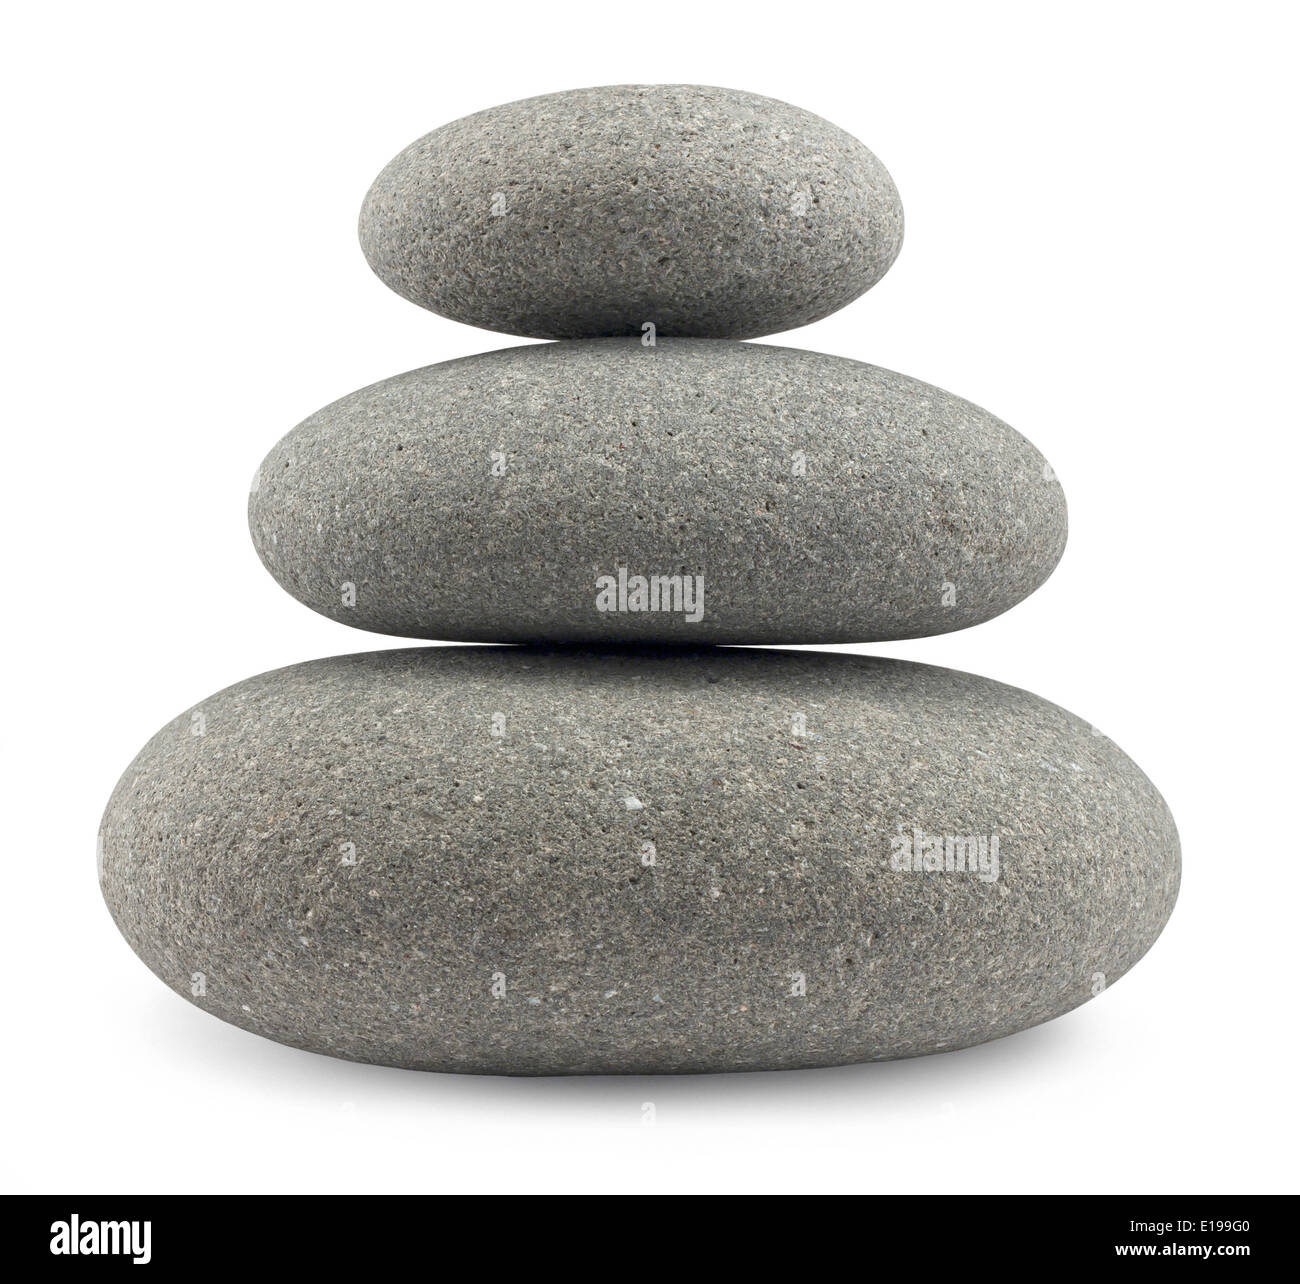 Rounded pebbles balancing in a uniform stack great concept for the perfect life balance Stock Photo